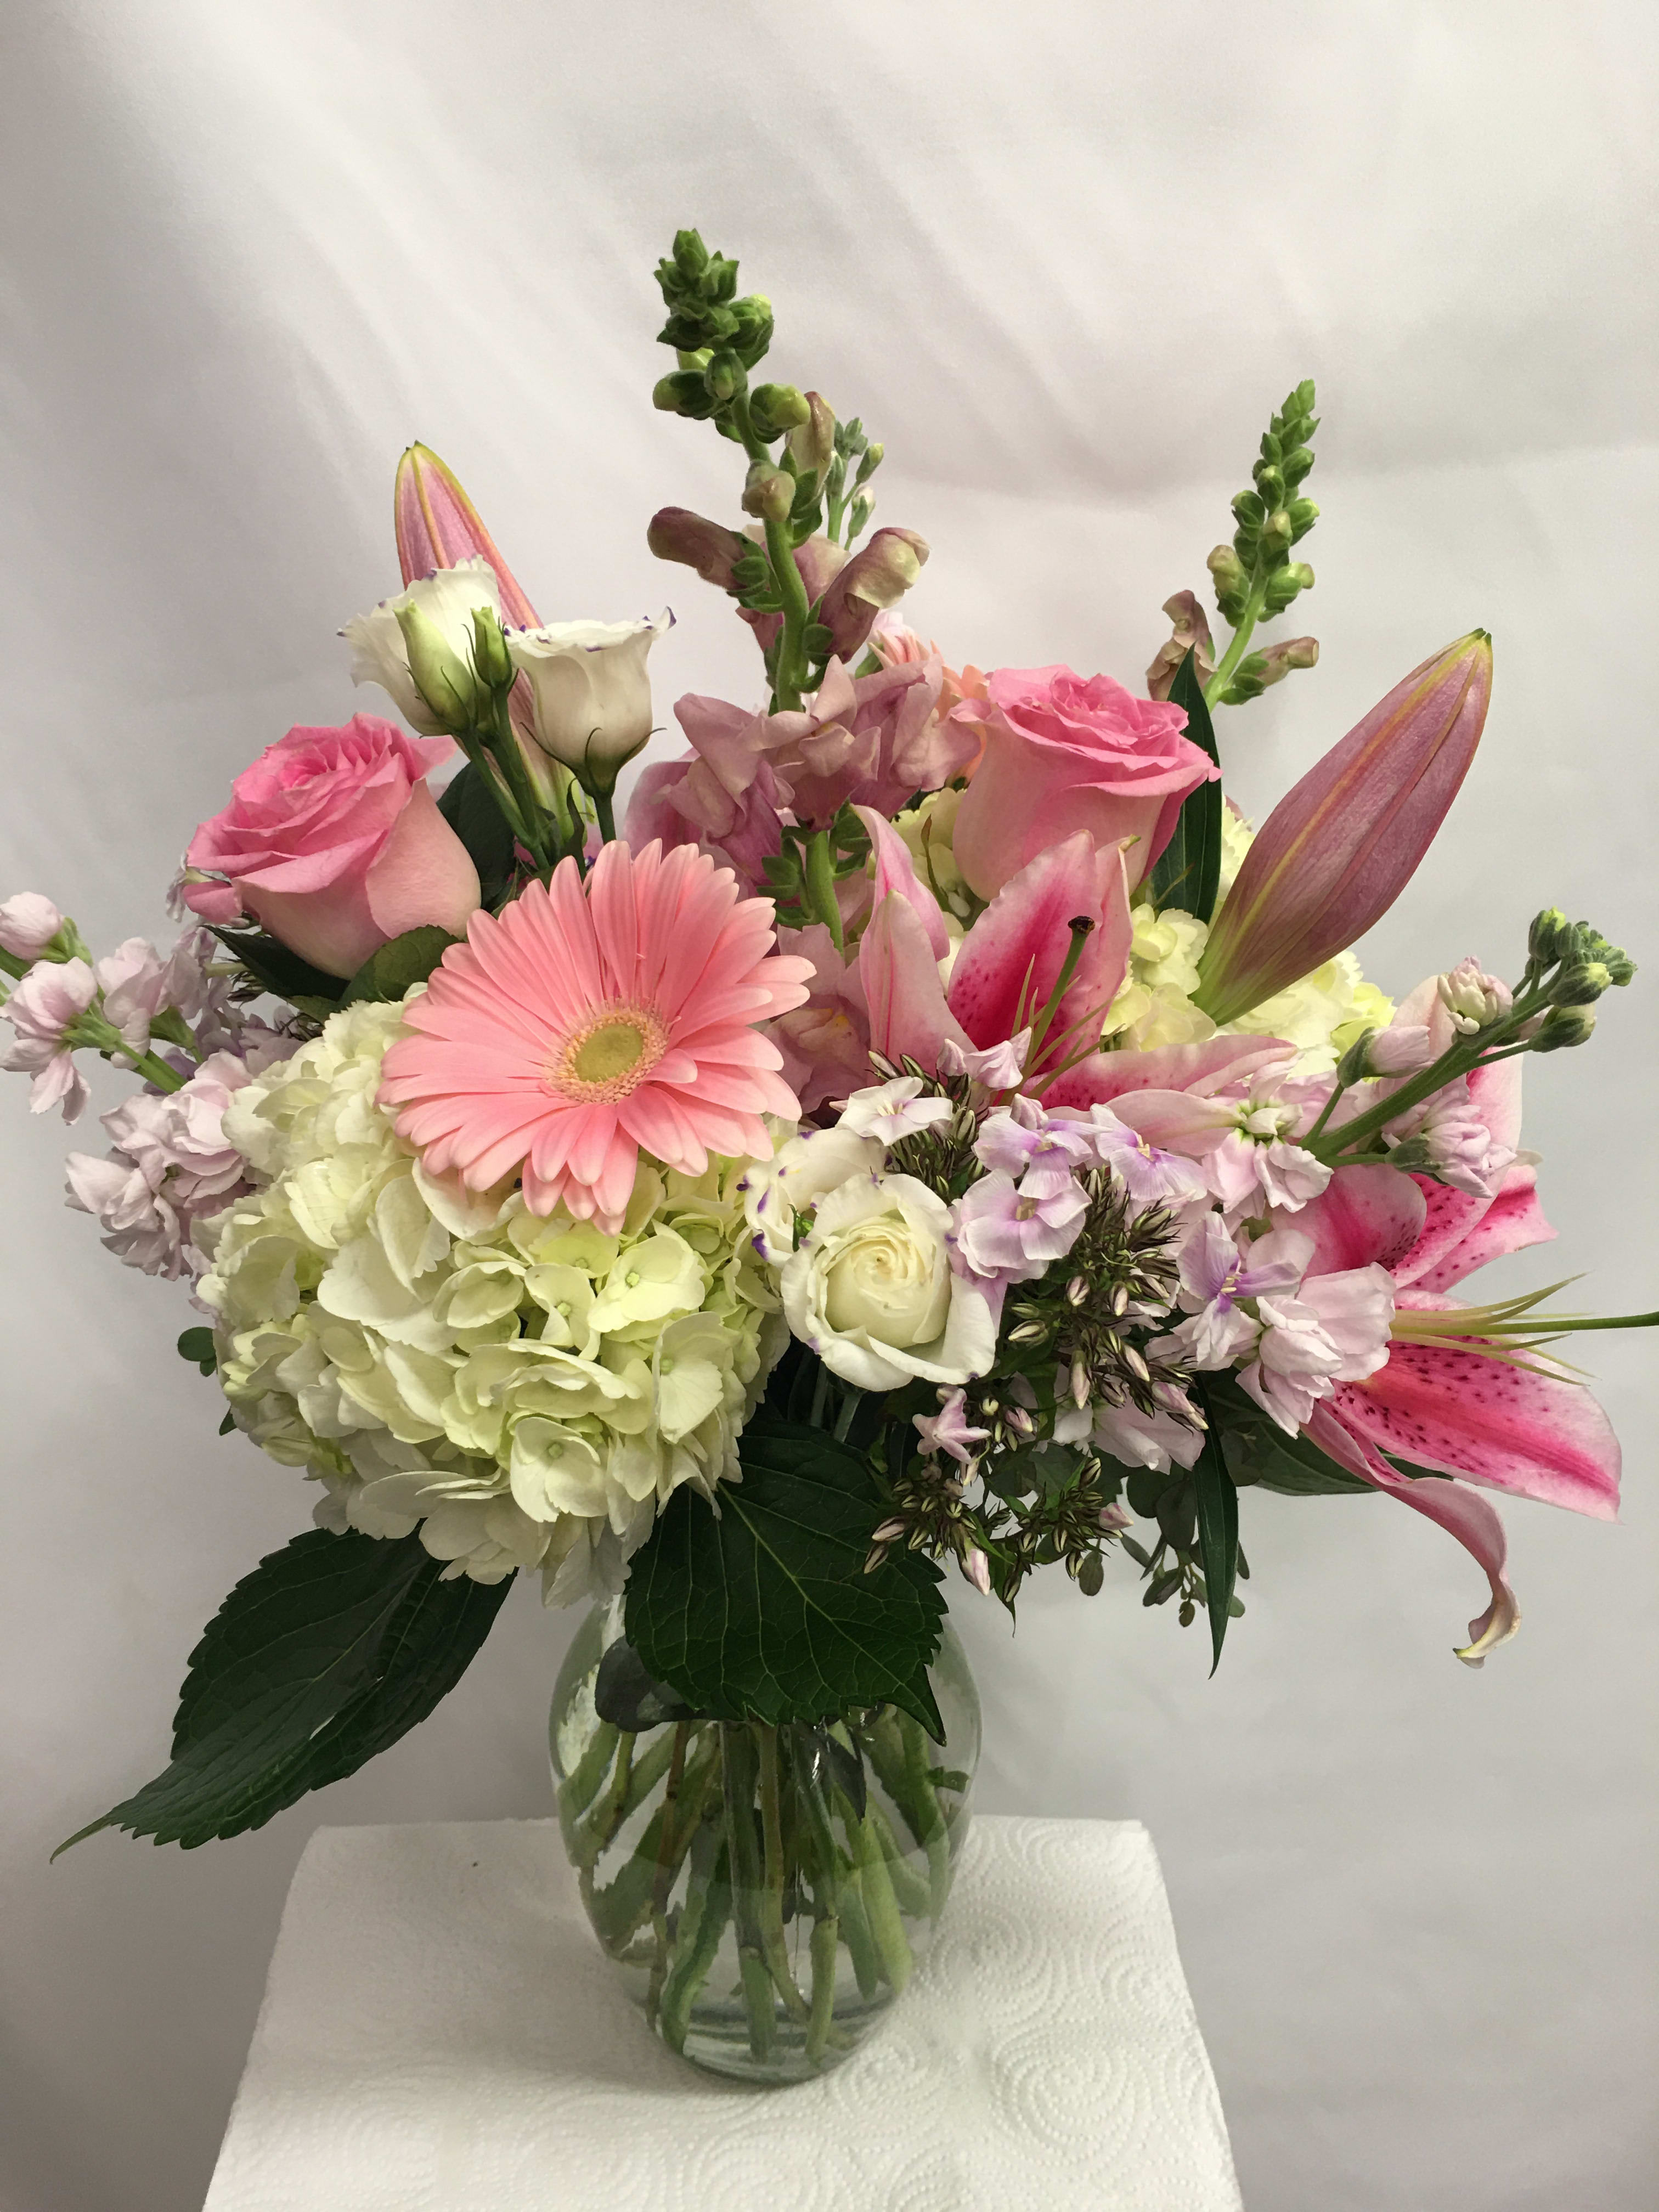 Sweet Pastels  - This vase of flowers is soft and elegant. It is lovely with an assortment of pastel seasonal flowers that include Snap Dragons, Lilies, Roses, Hydrangea &amp; Stock and other complimenting flowers throughout. 